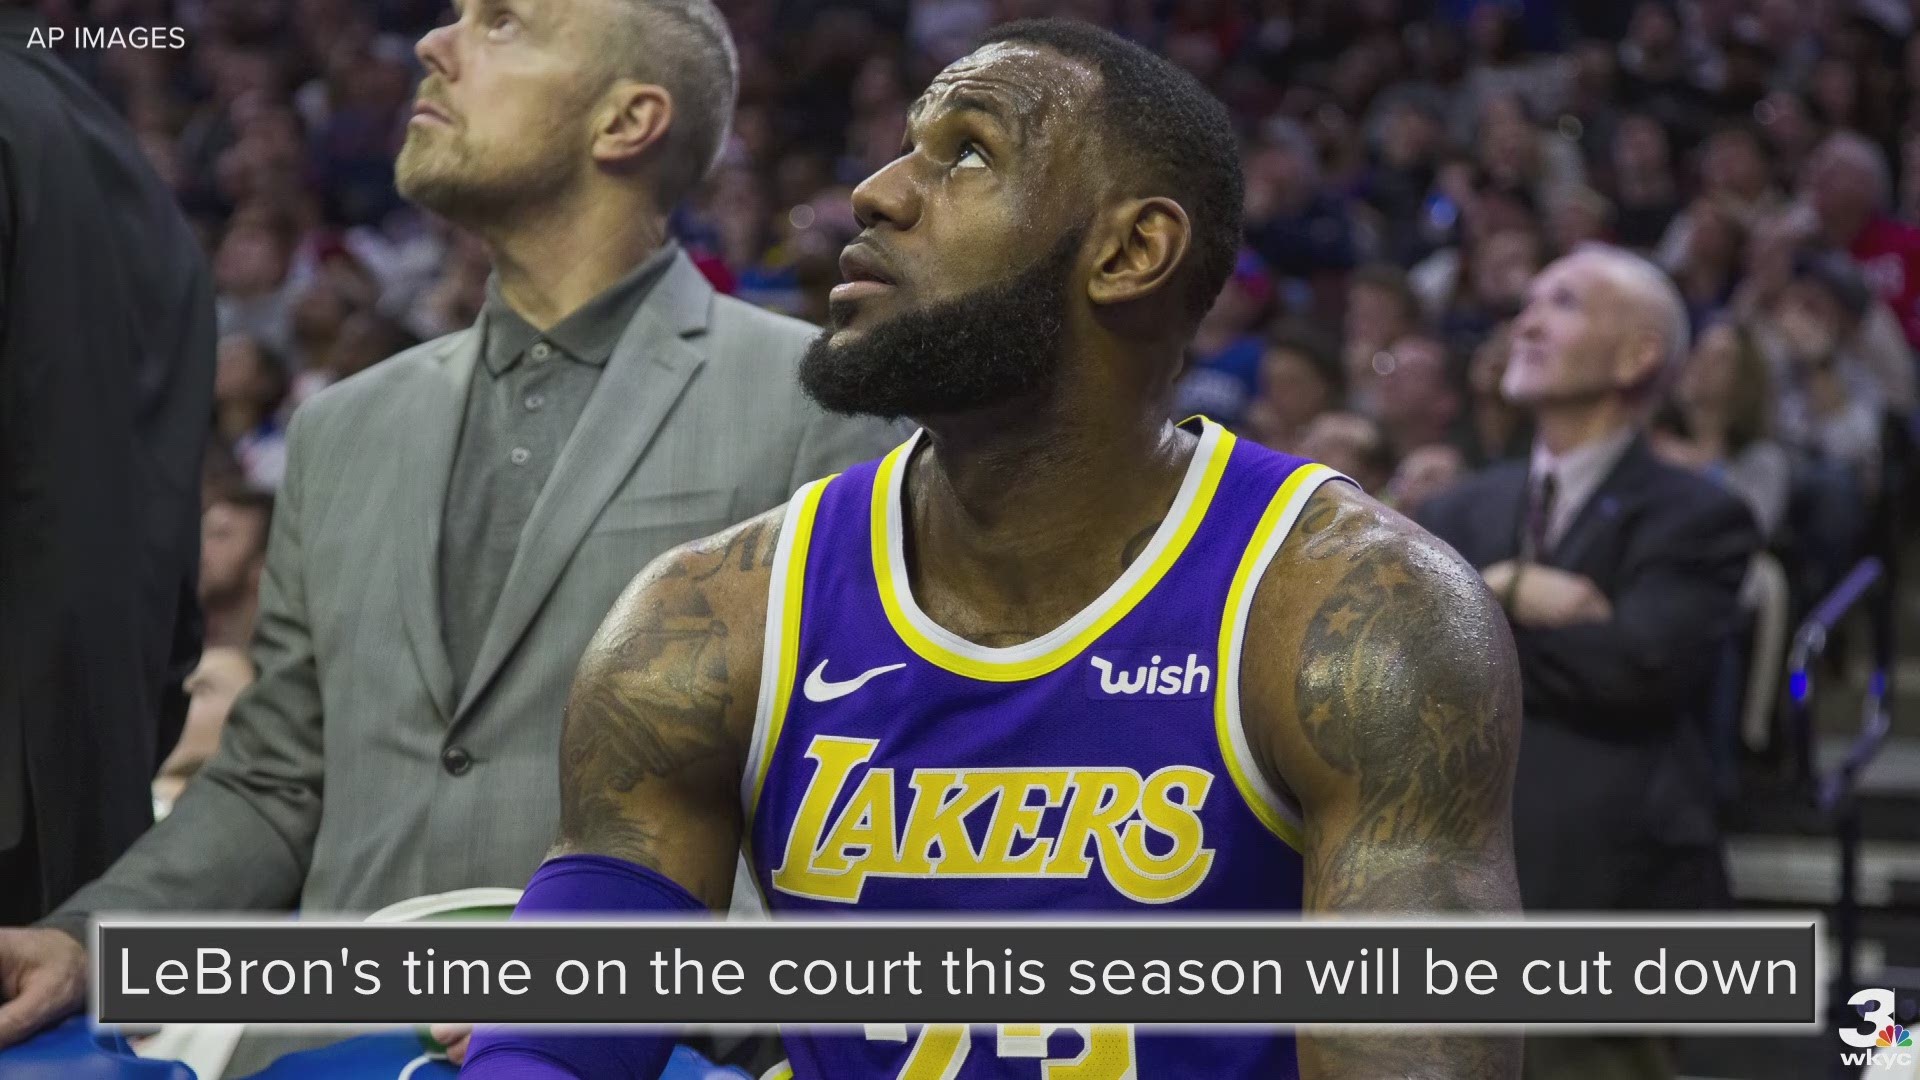 According to Chris Haynes of Yahoo Sports, LeBron James will spend the remainder of his first season with the Los Angeles Lakers playing on a minutes restriction.